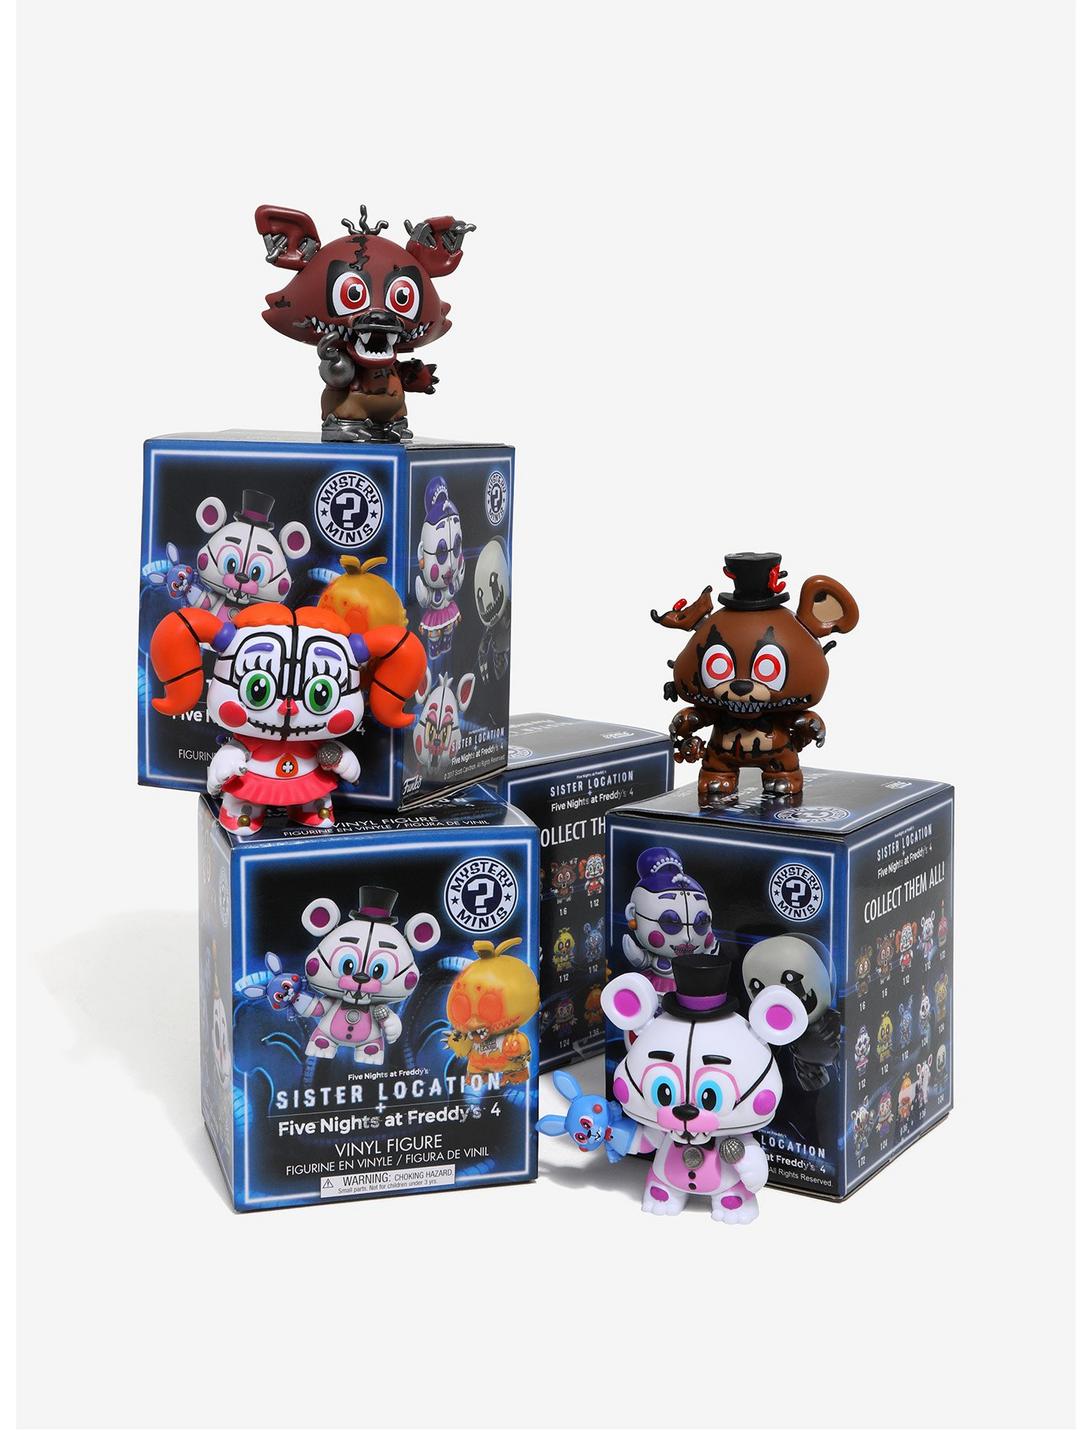 SISTER LOCATION Funko Mystery Minis Five Nights at Freddy's Blind Box Figures 